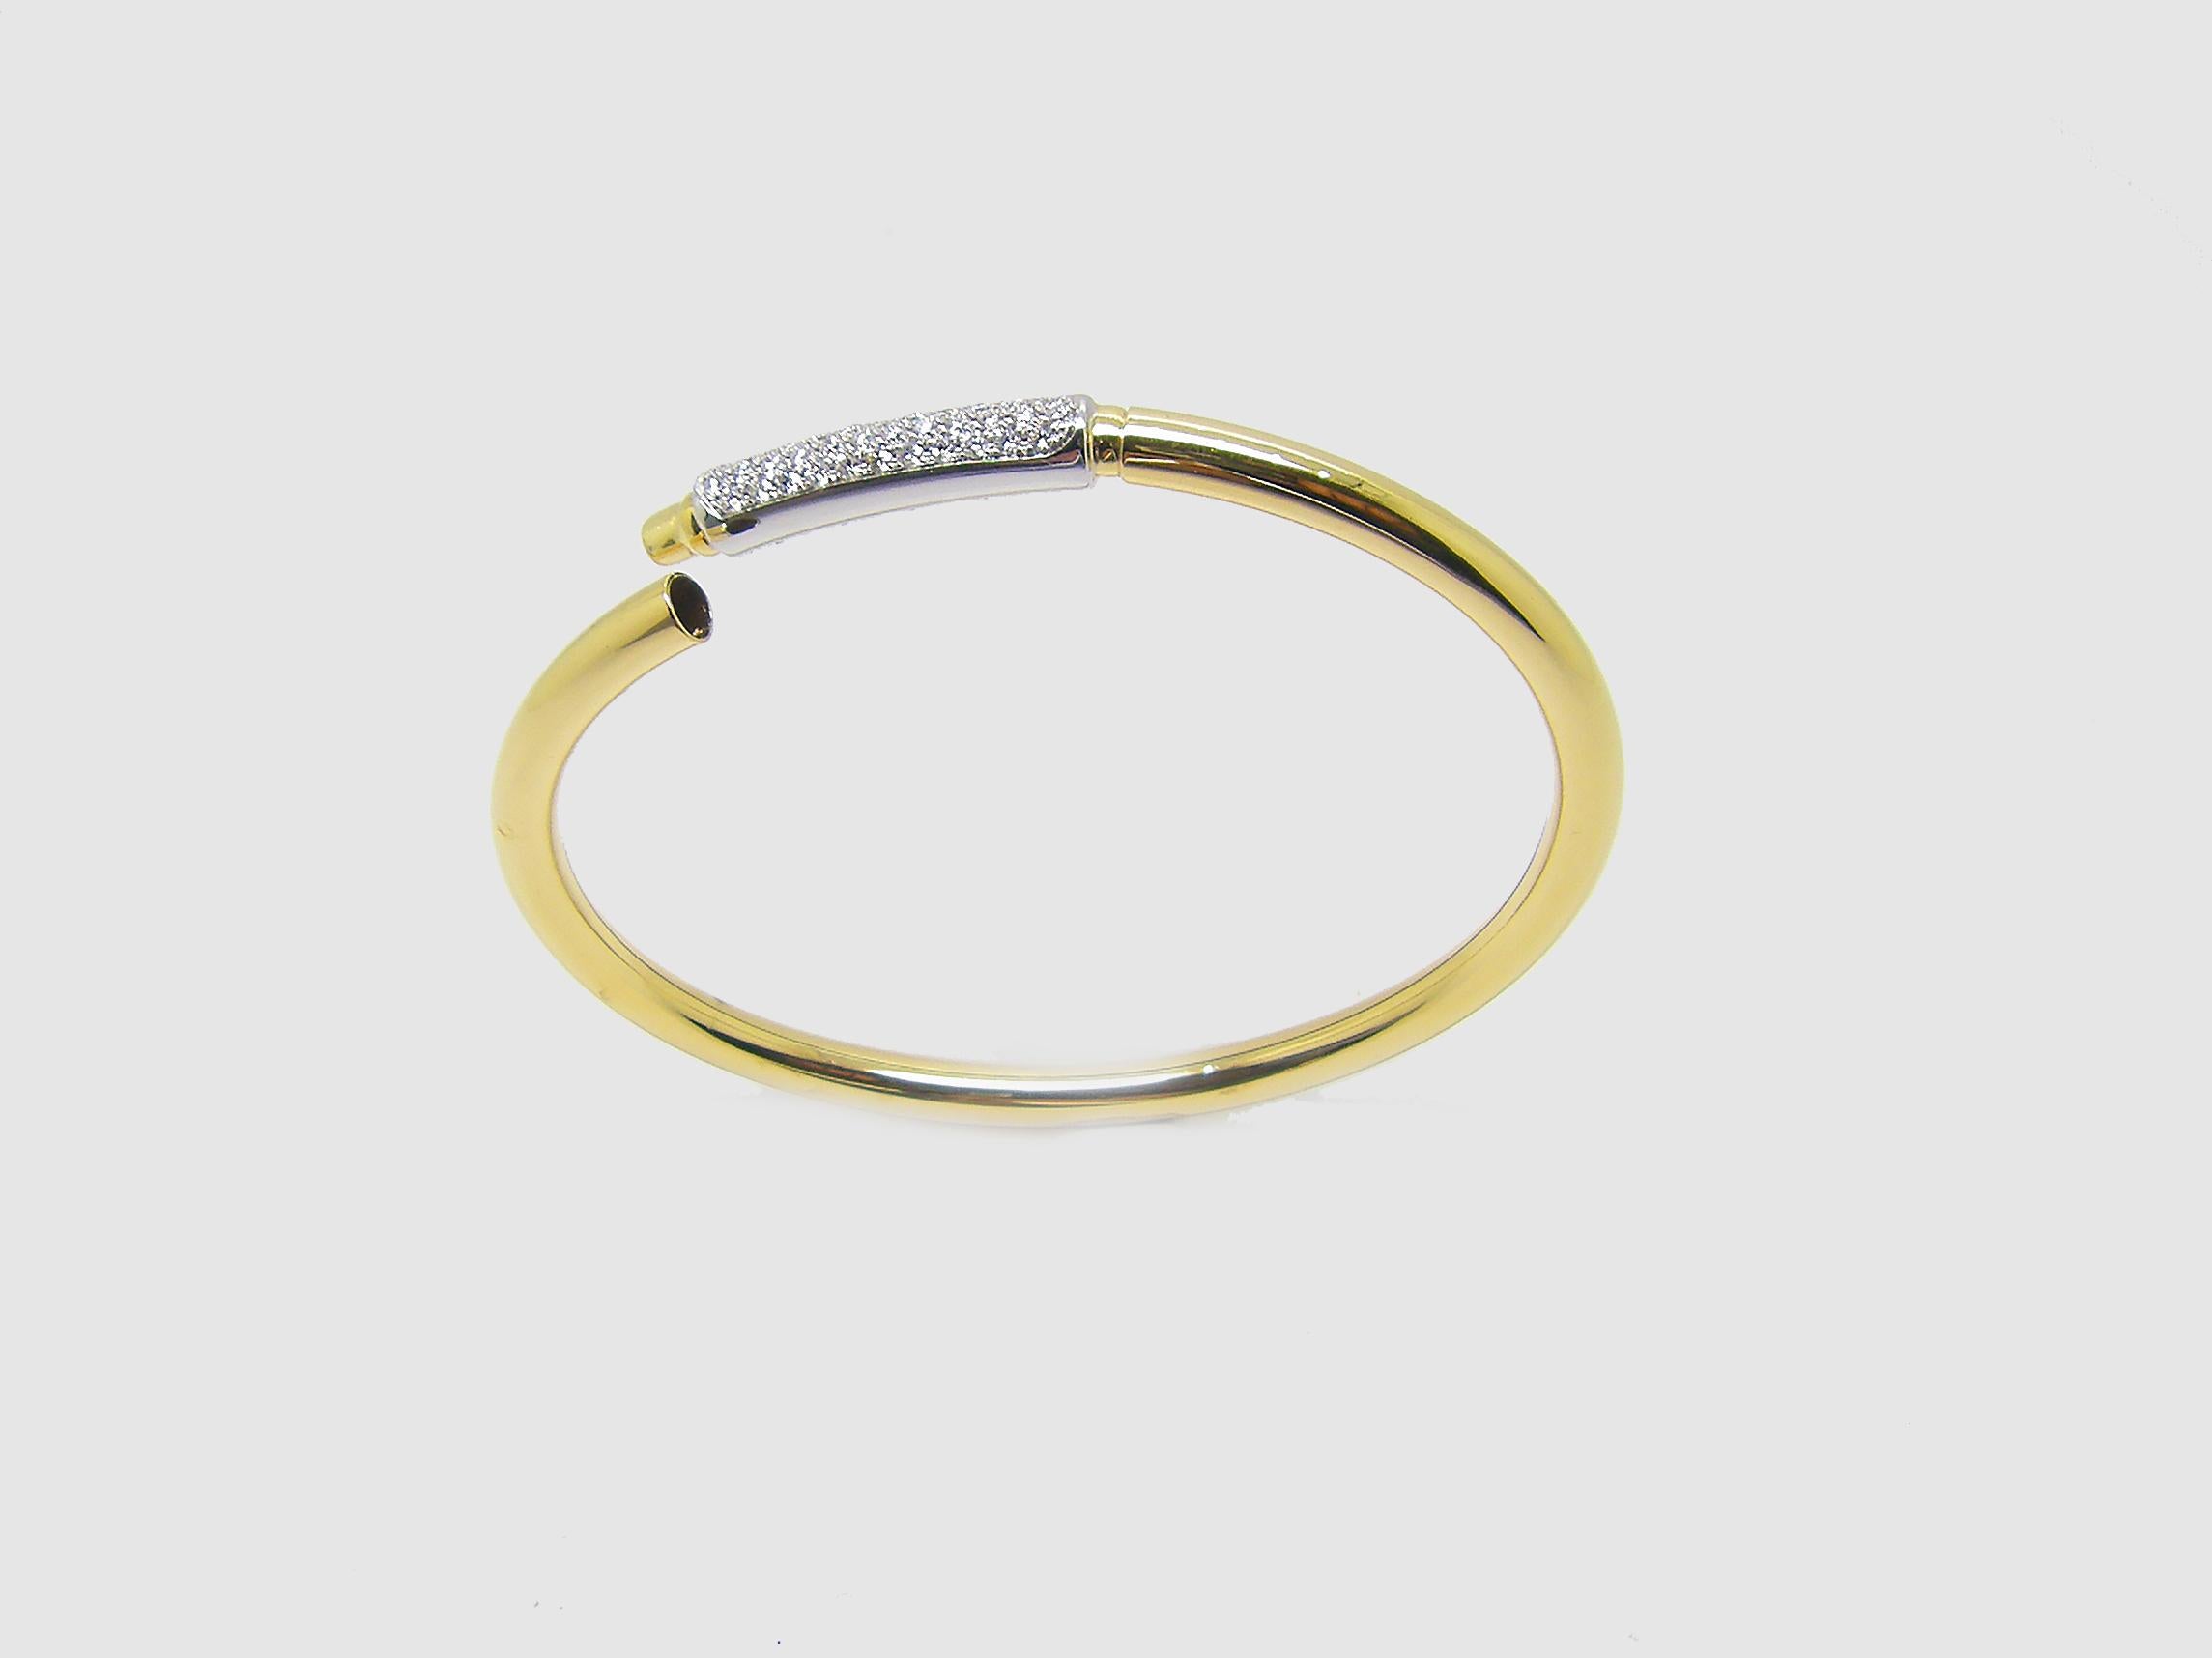 S.Georgios designer bangle cuff bracelet is custom made of Yellow and White gold 18 karats. The gorgeous bangle has brilliant cut white diamonds total weight of 0.44 Carat set microscopically on a bar of white gold 18 Karat and has a wonderful